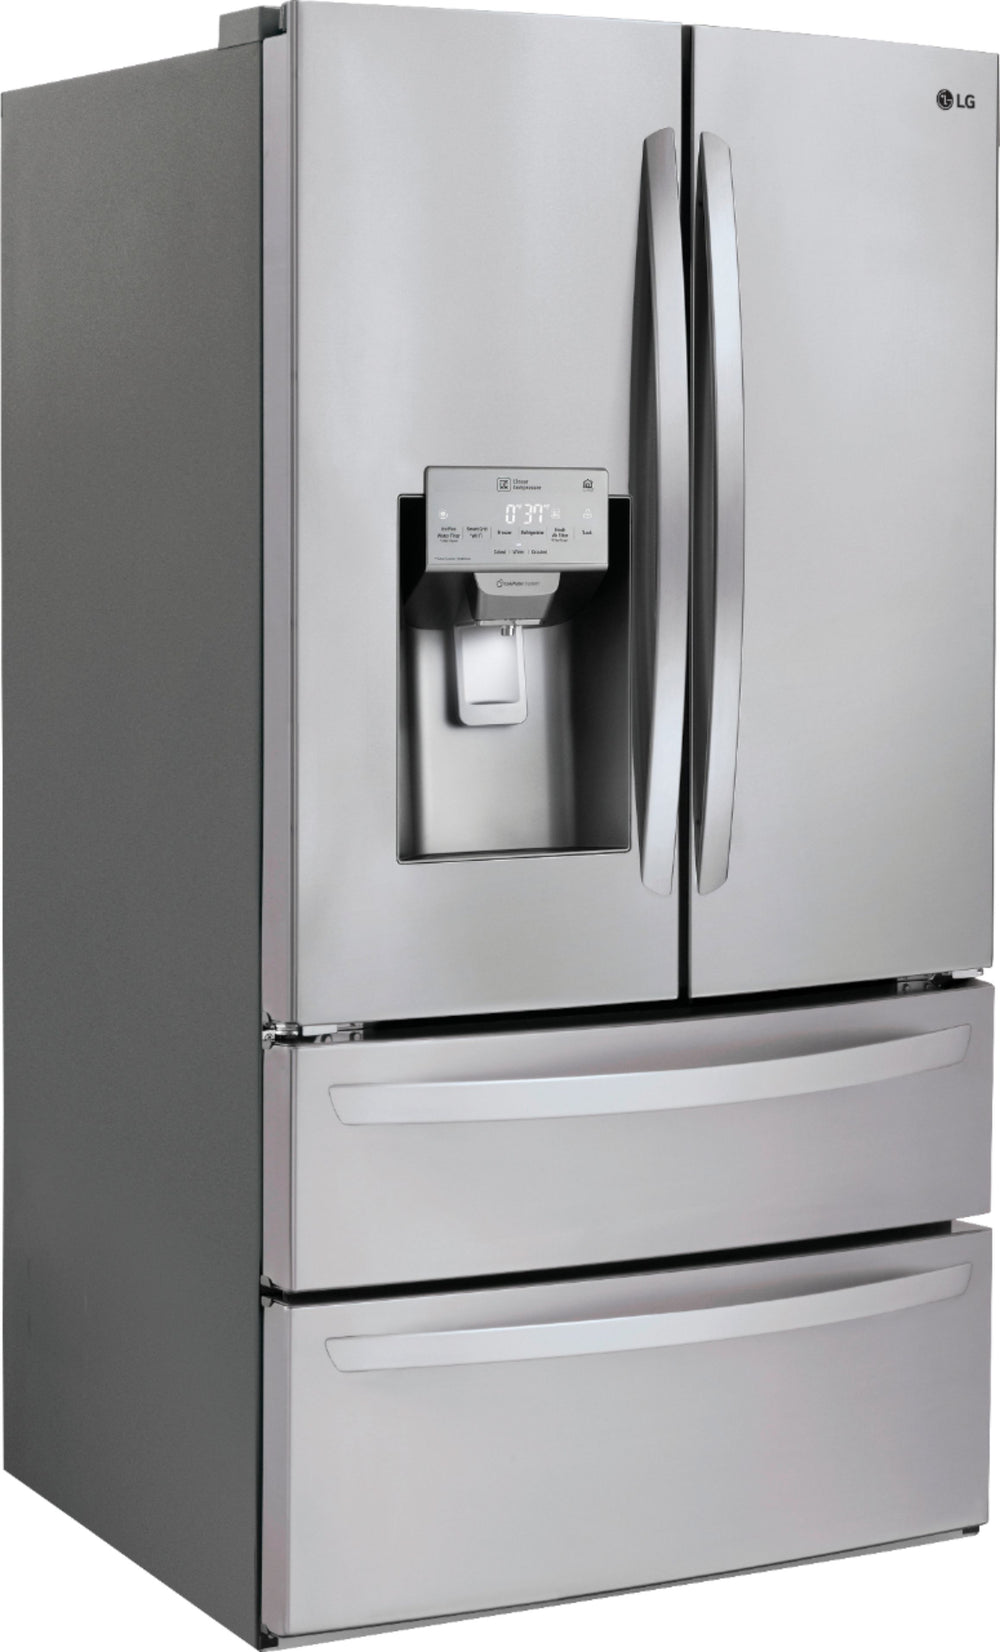 LG - 27.8 Cu. Ft. 4-Door French Door Smart Refrigerator with Smart Cooling System - Stainless steel_1